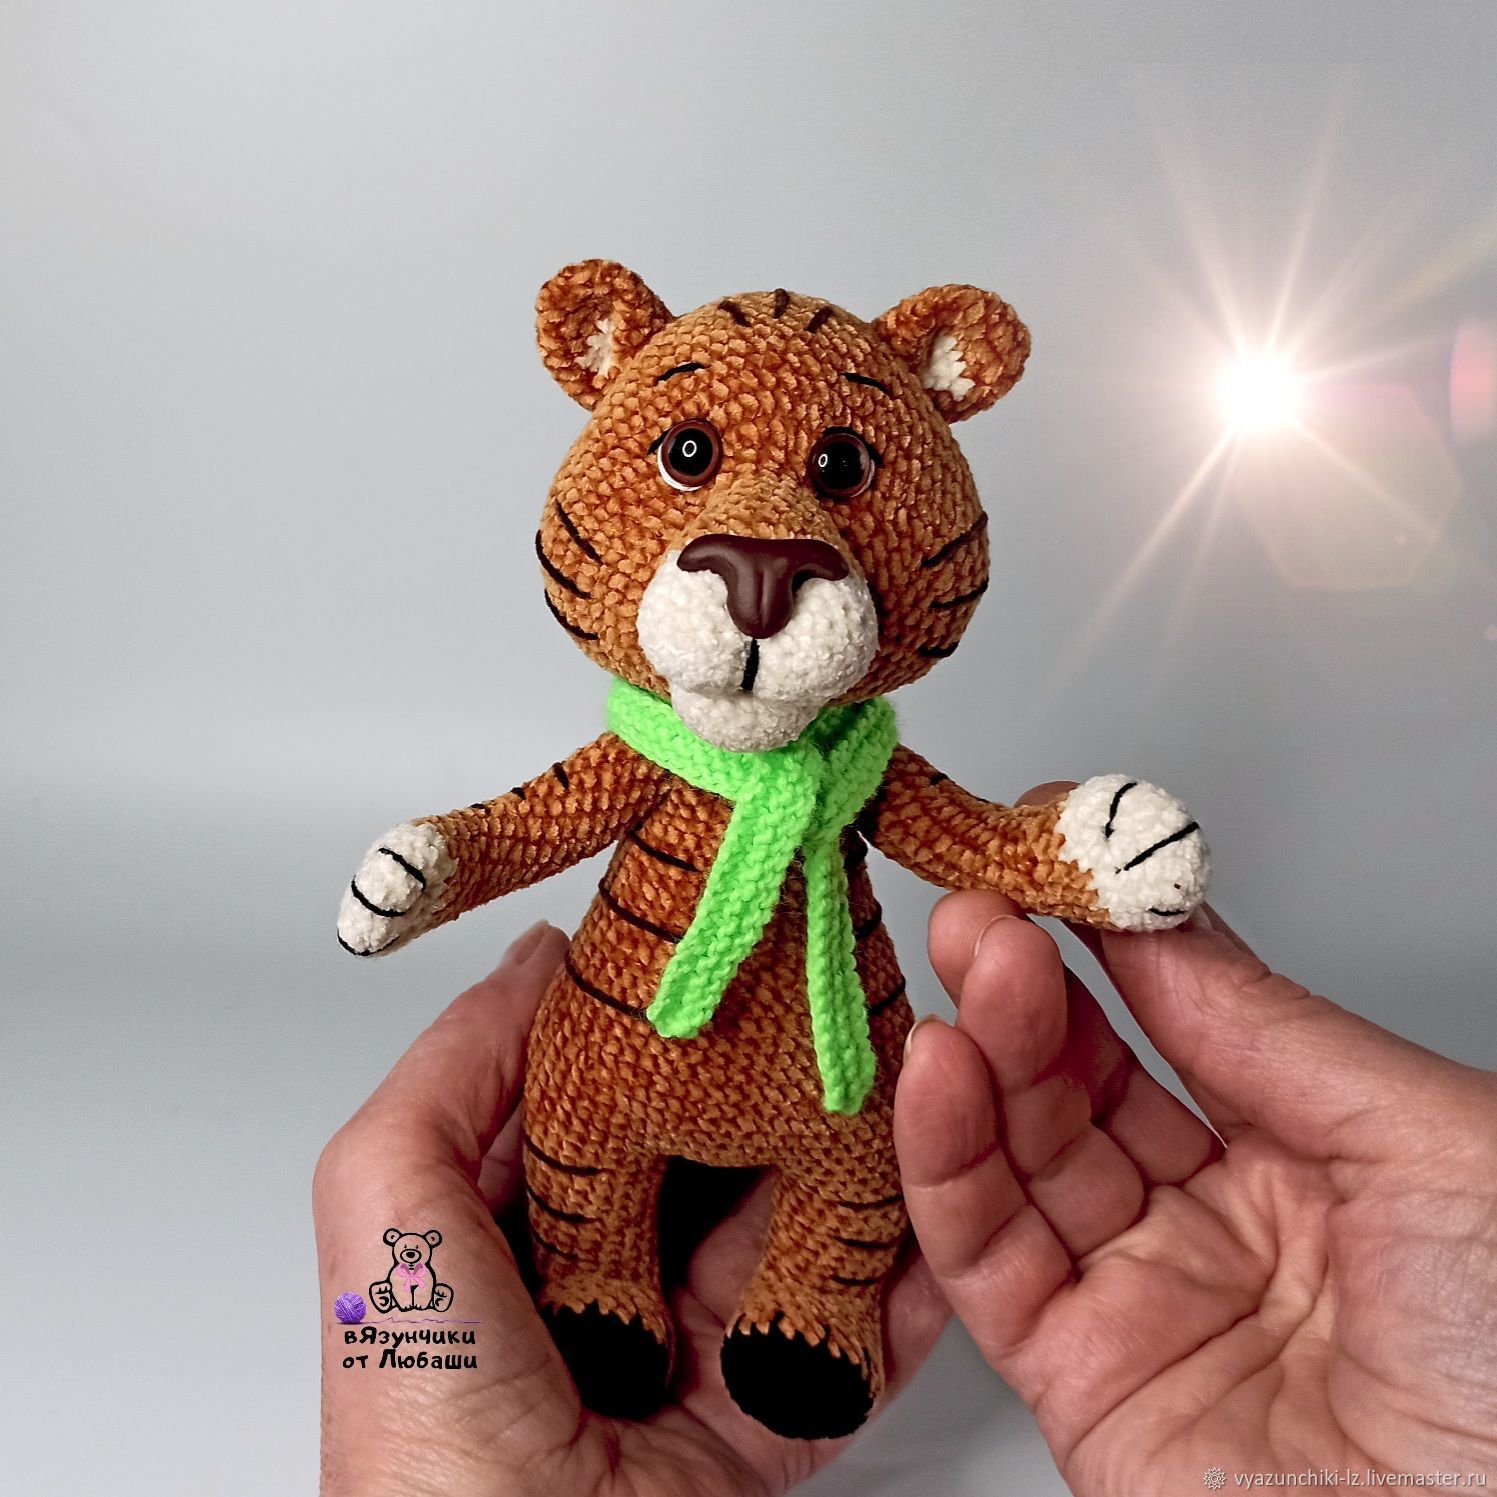 Tiger Plush knitted tiger toy made of velour yarn as a gift, Stuffed Toys, Volokolamsk,  Фото №1